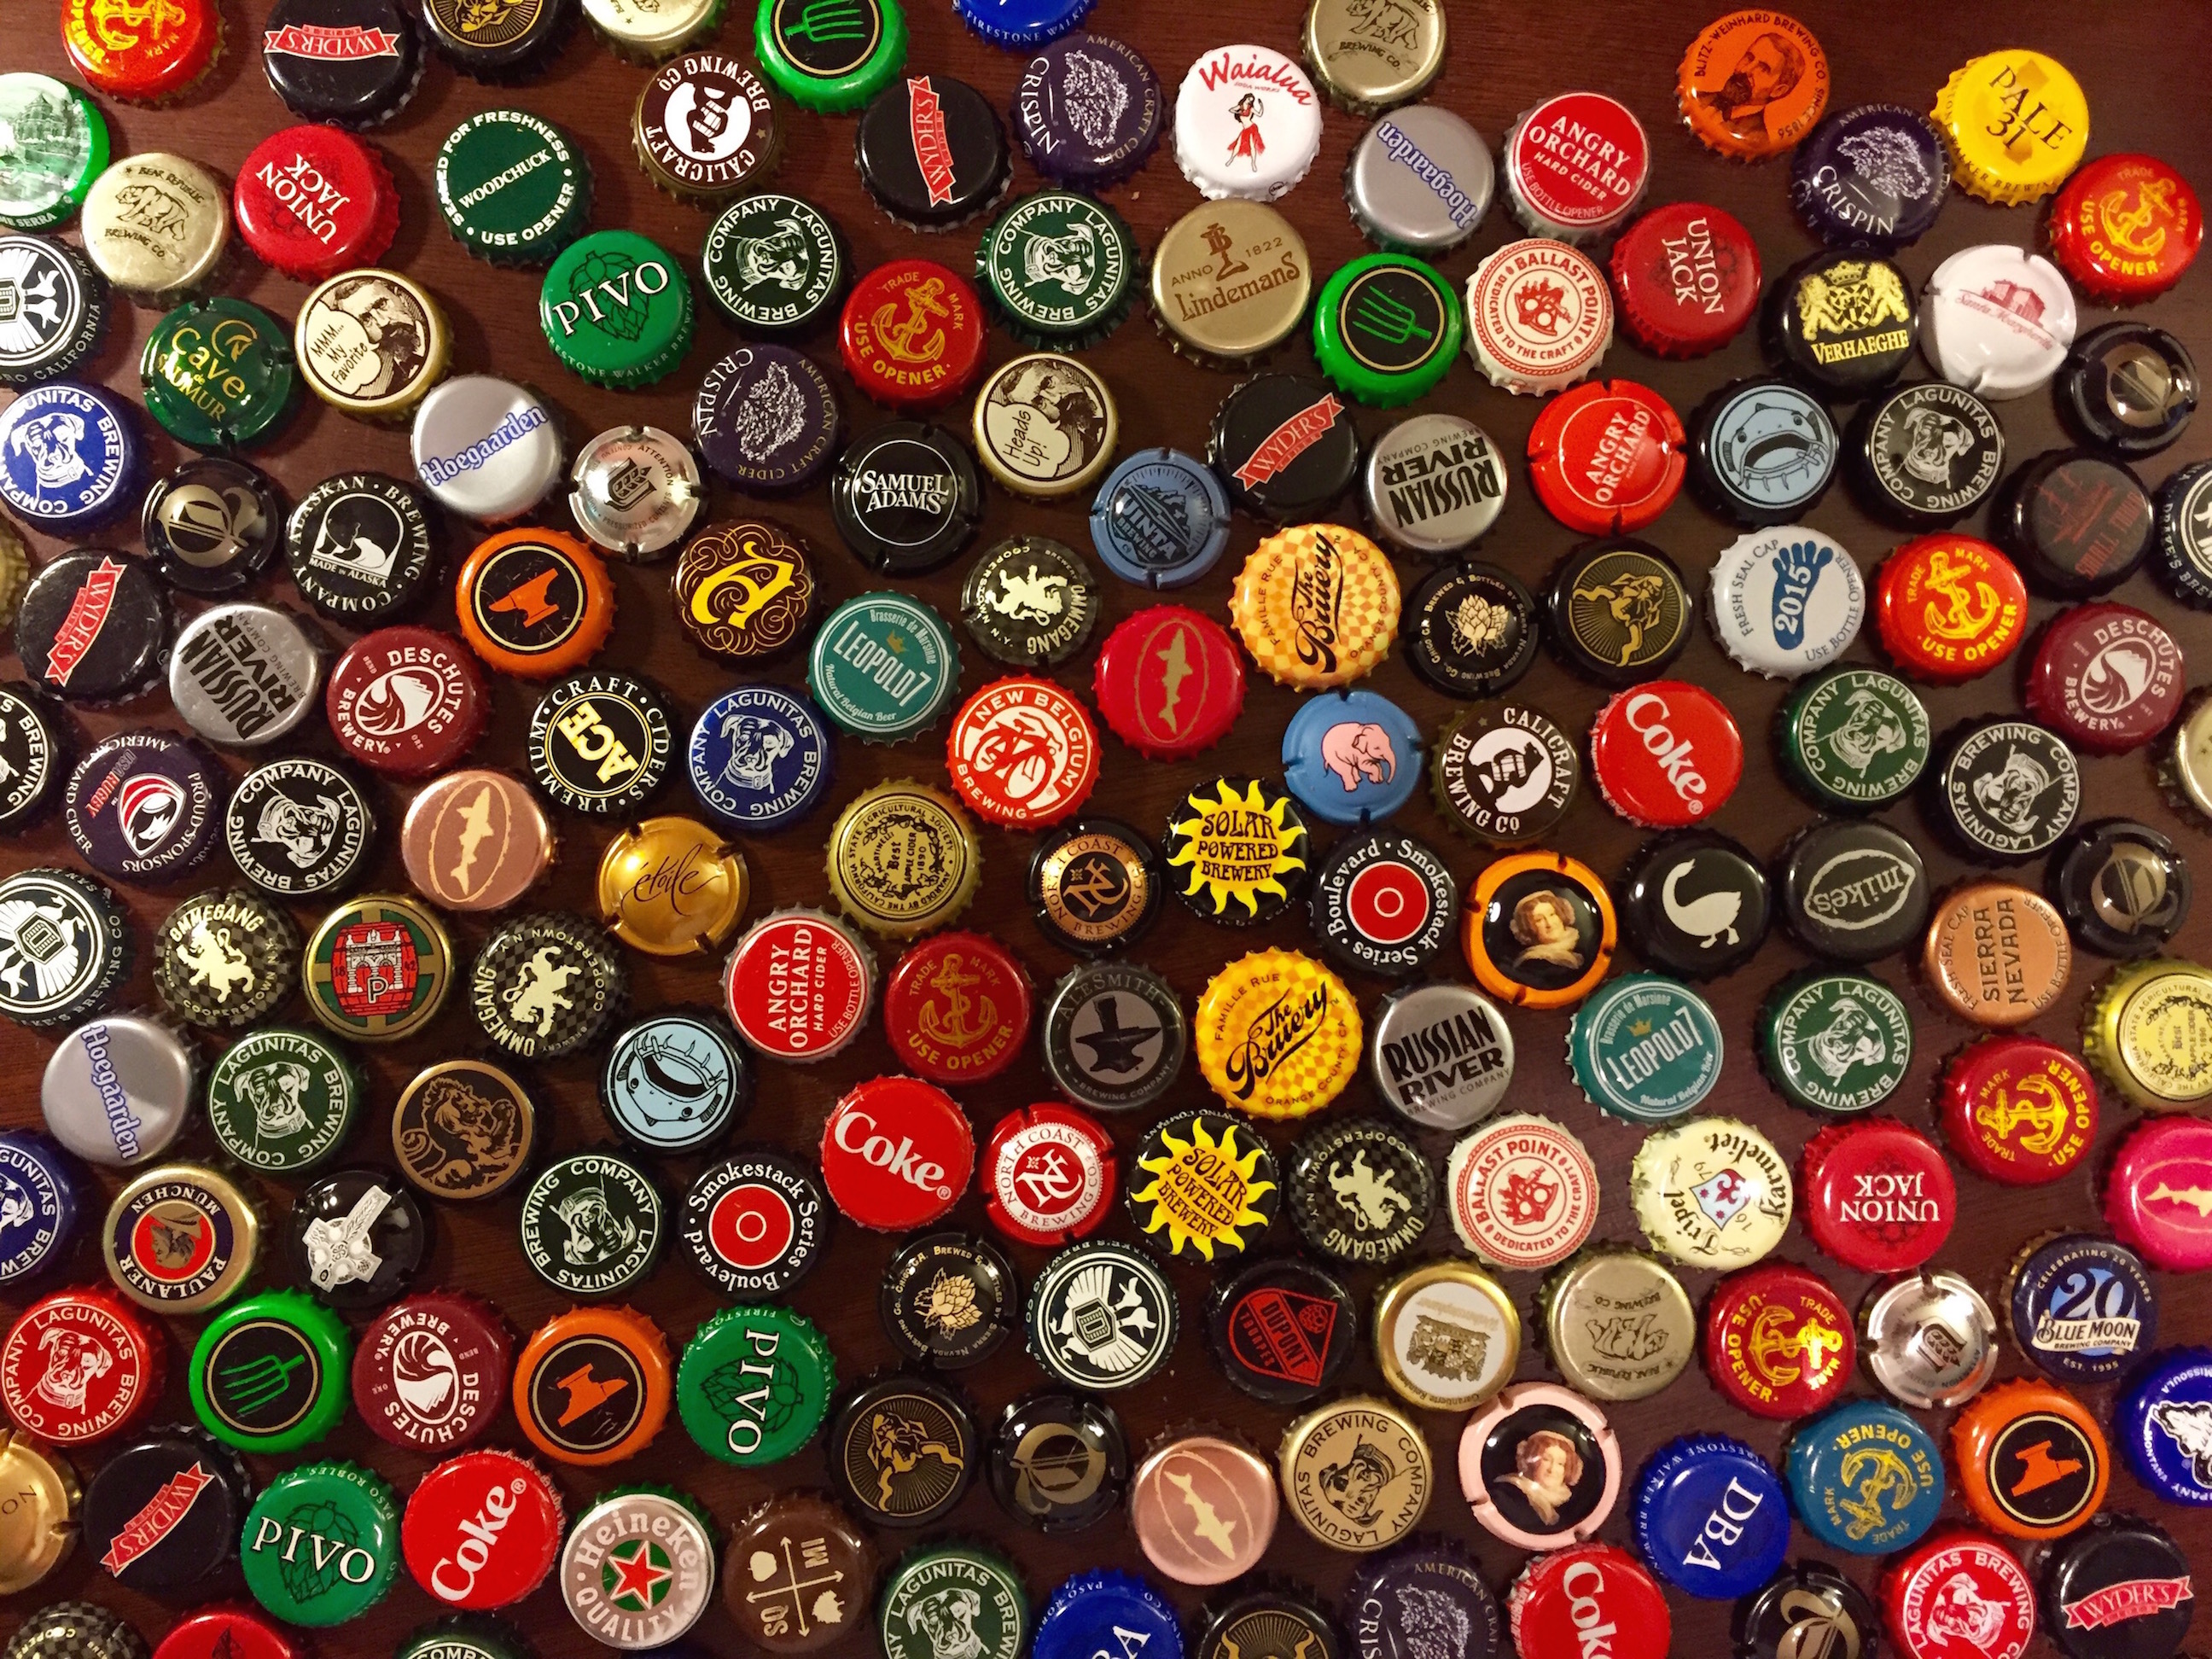 This Fun, Easy Craft Makes Use of All Those Beer Bottle Caps